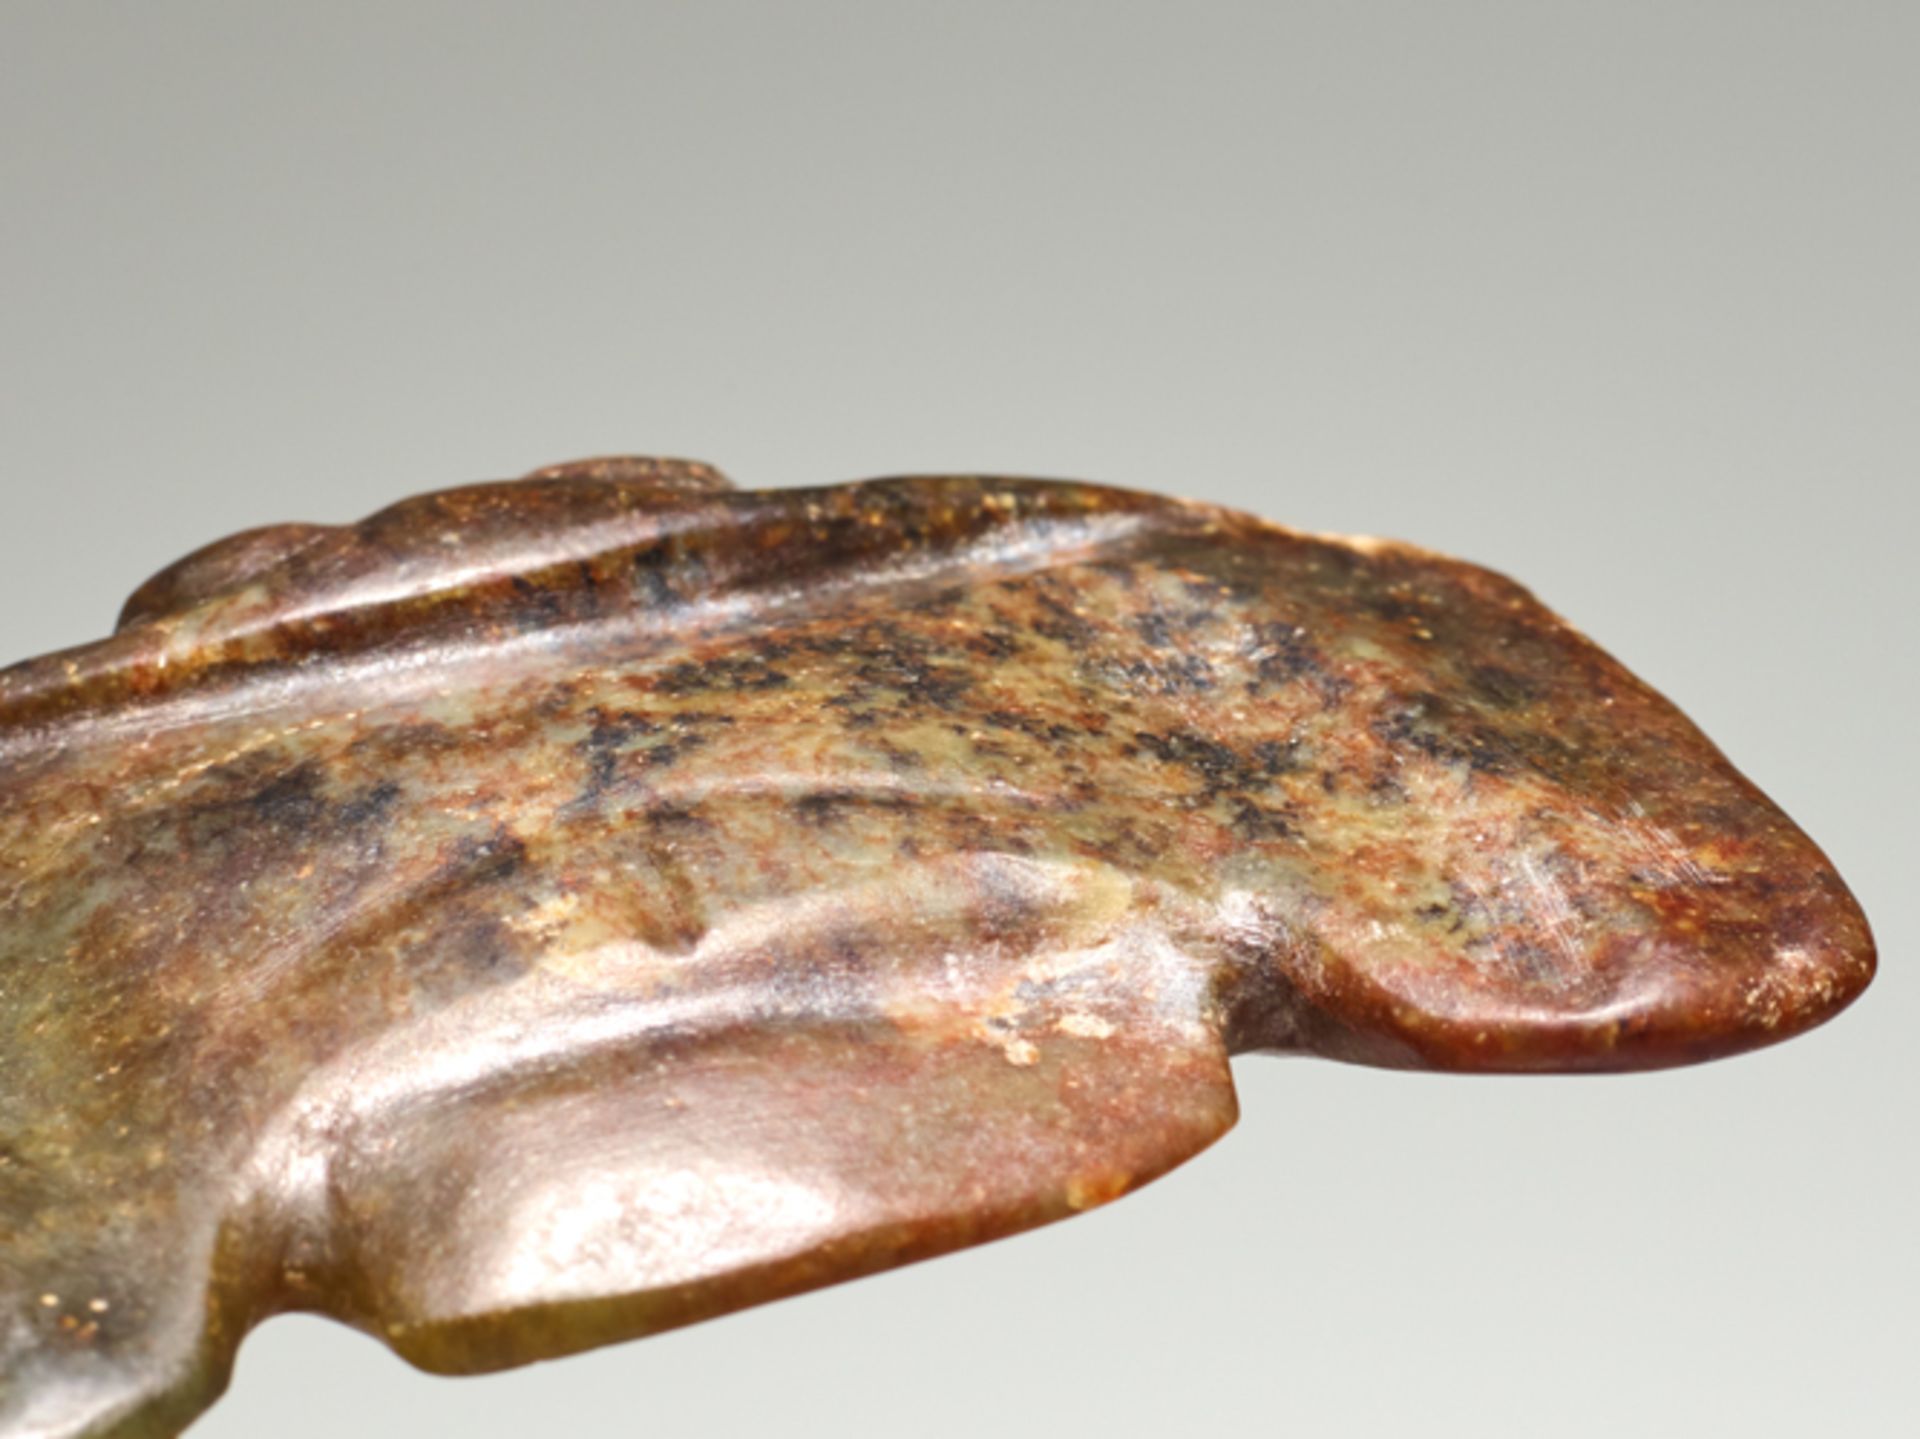 BIRD-SHAPED PENDANTJade. China, Hongshan culture, c.3500-3000 BCPendants shaped as birds form one of - Image 3 of 4